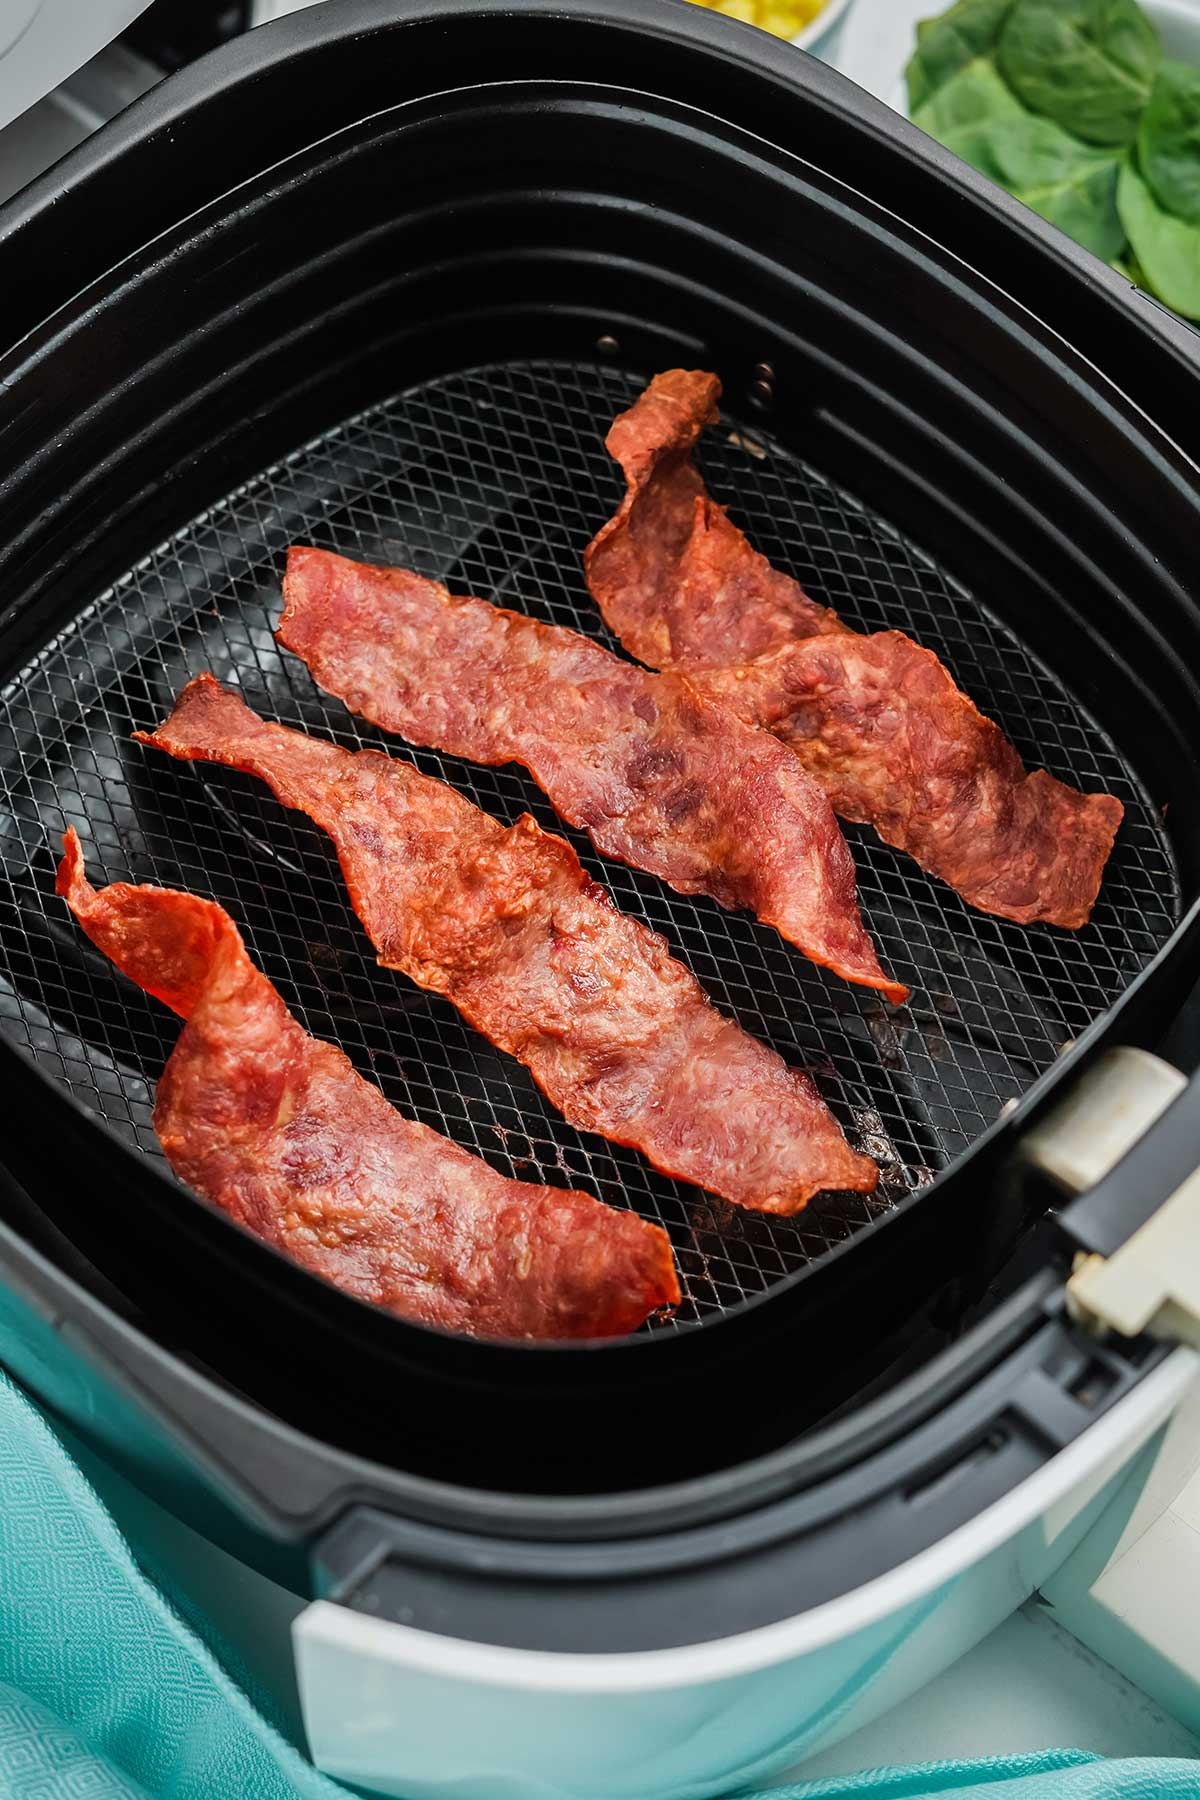 Cooked air fryer turkey bacon in the air fryer.